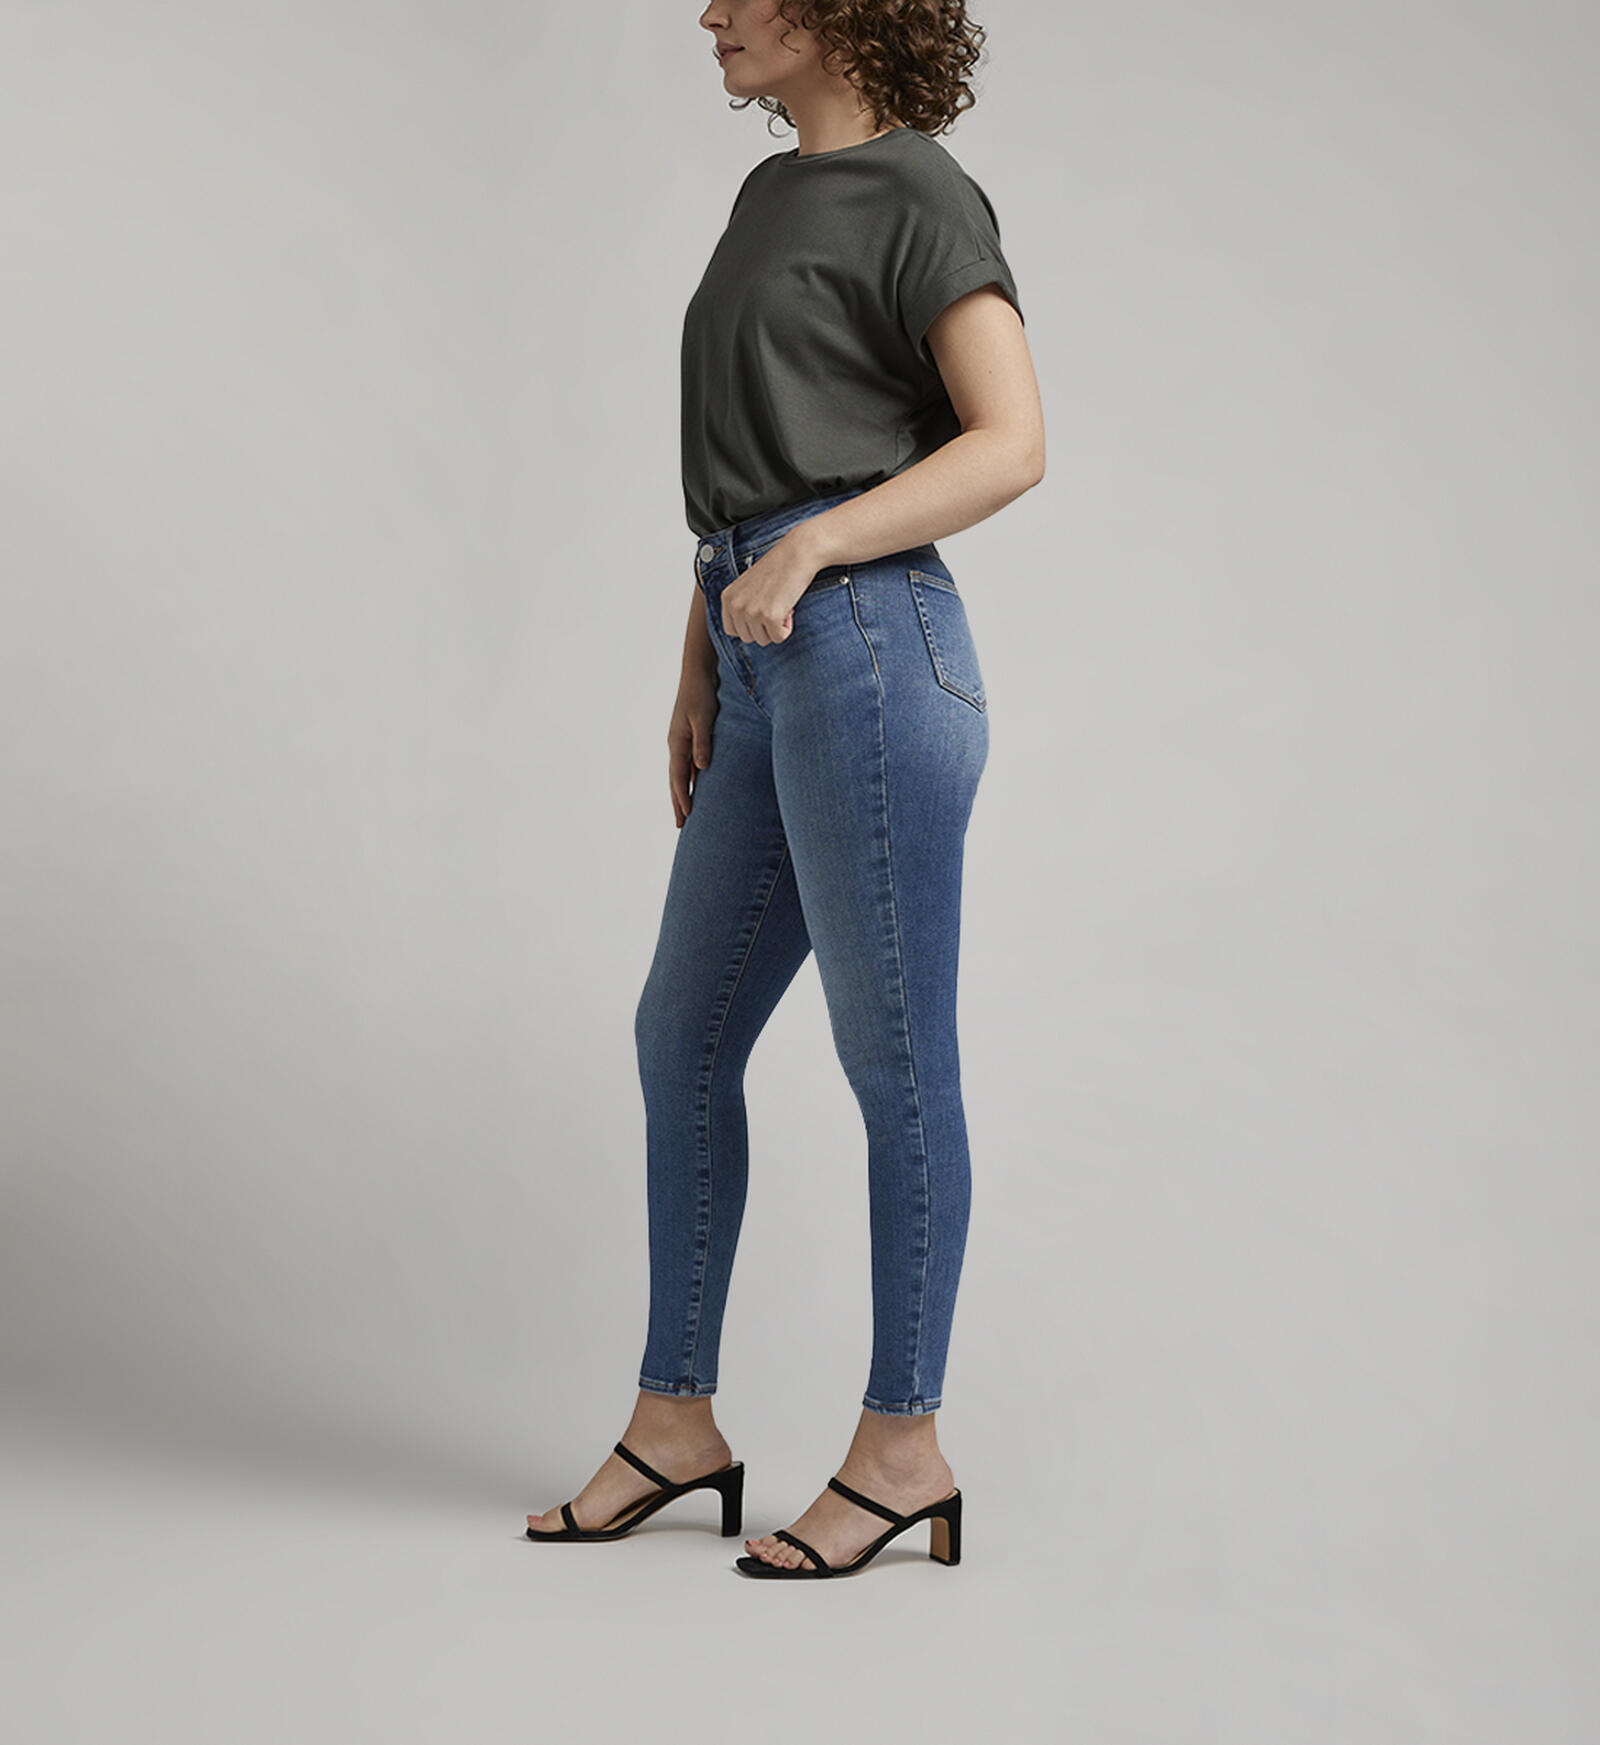 Rise 74.00 New Forever Jeans | Stretch US Jag Jeans High for Buy USD